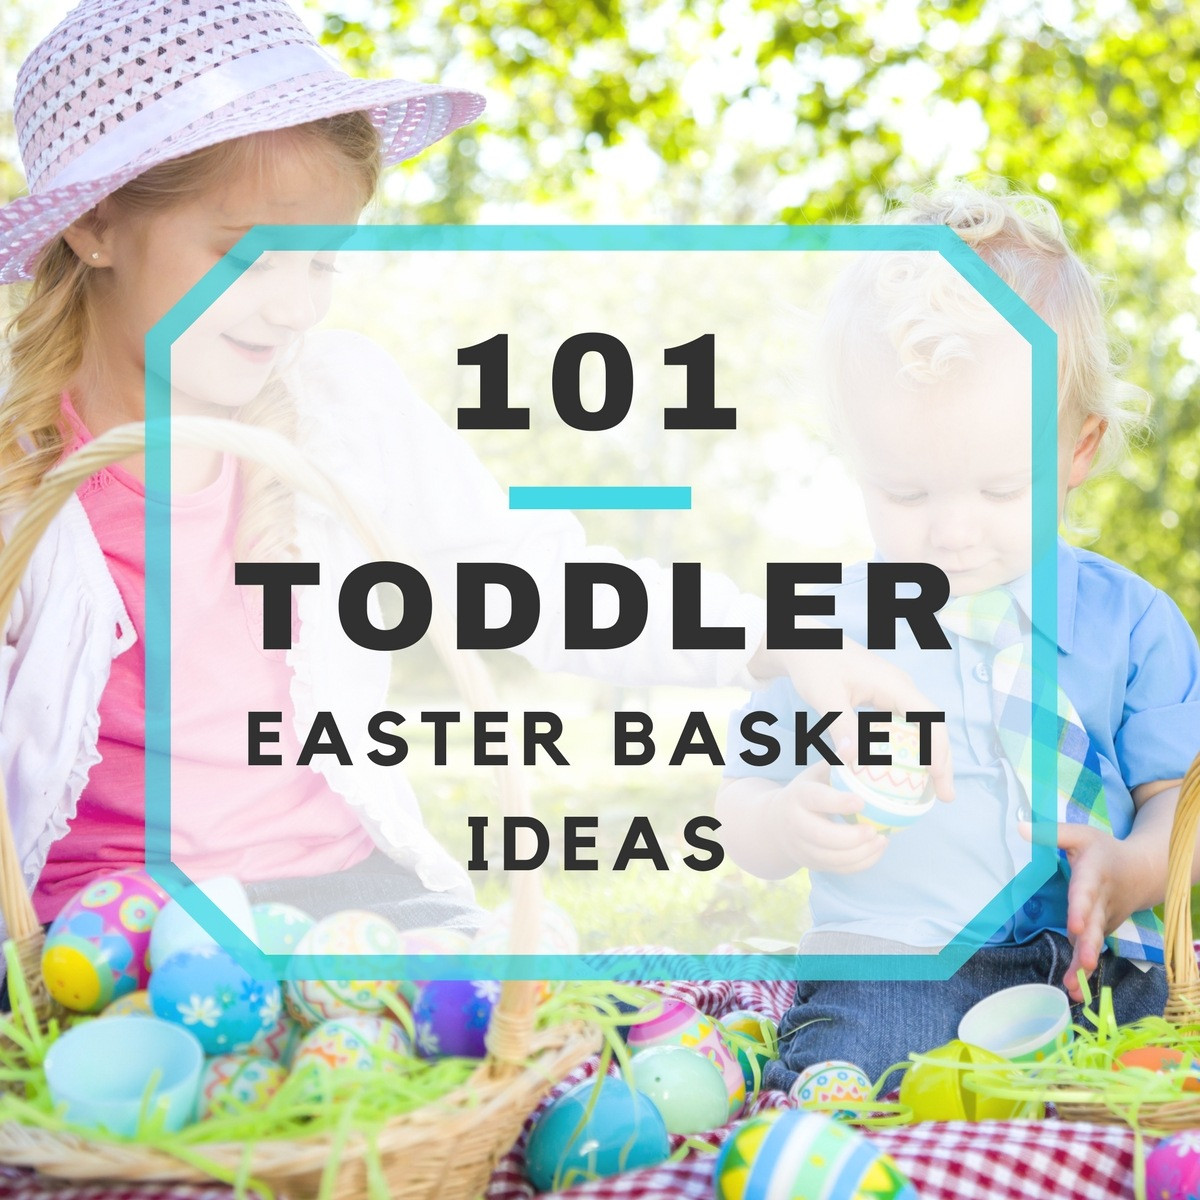 Ideas For Easter Baskets For Toddlers
 101 Toddler Easter Basket Ideas